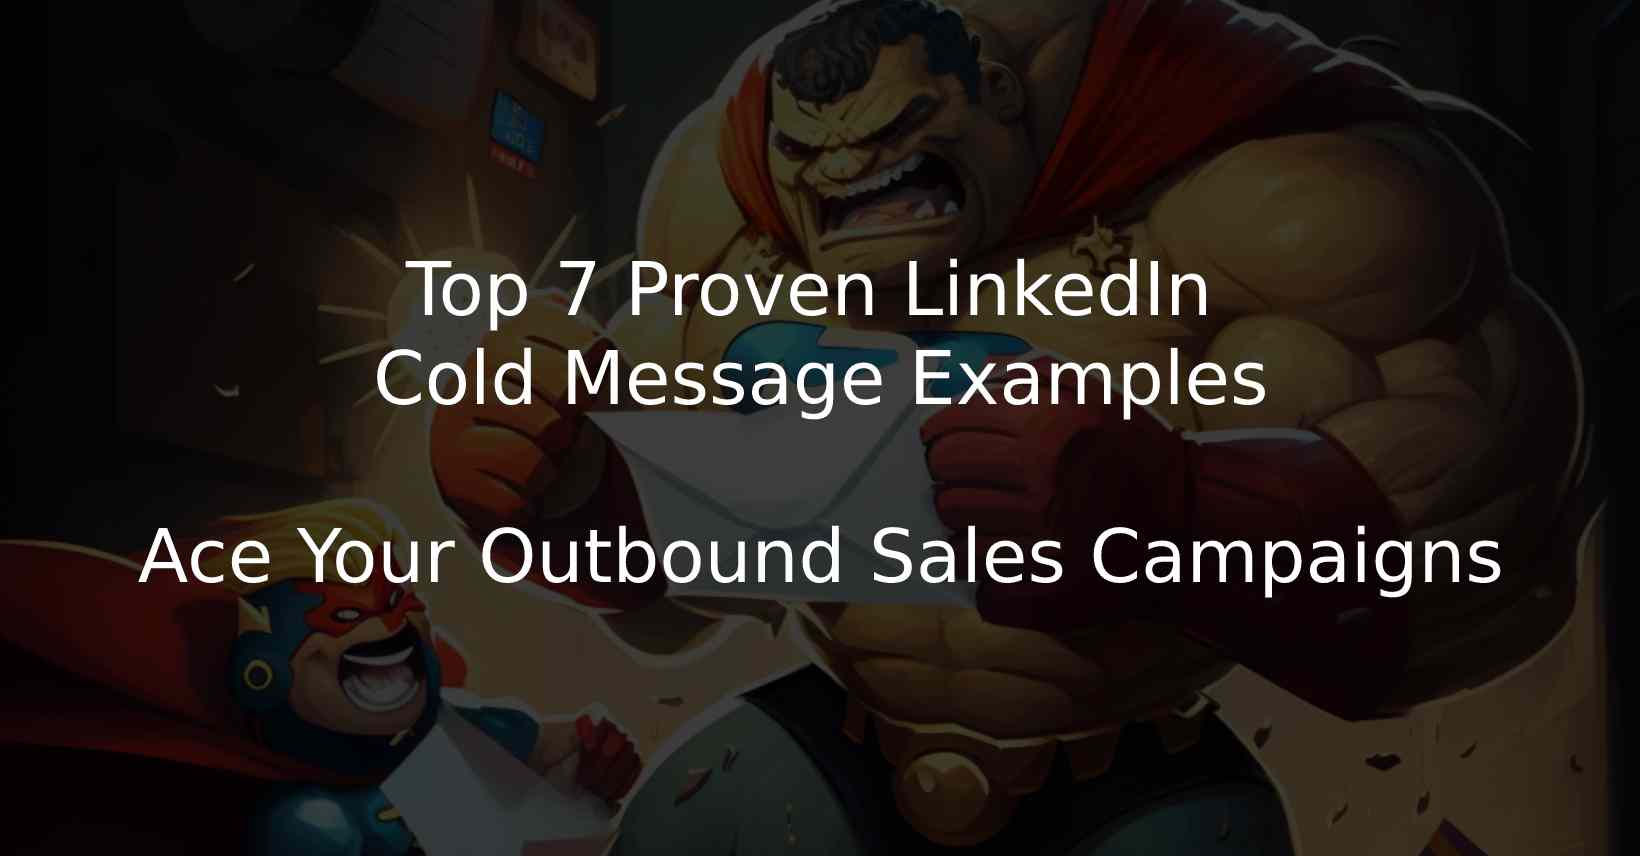 Top 7 Proven LinkedIn Cold Message Examples To Ace Your Outbound Sales Campaigns